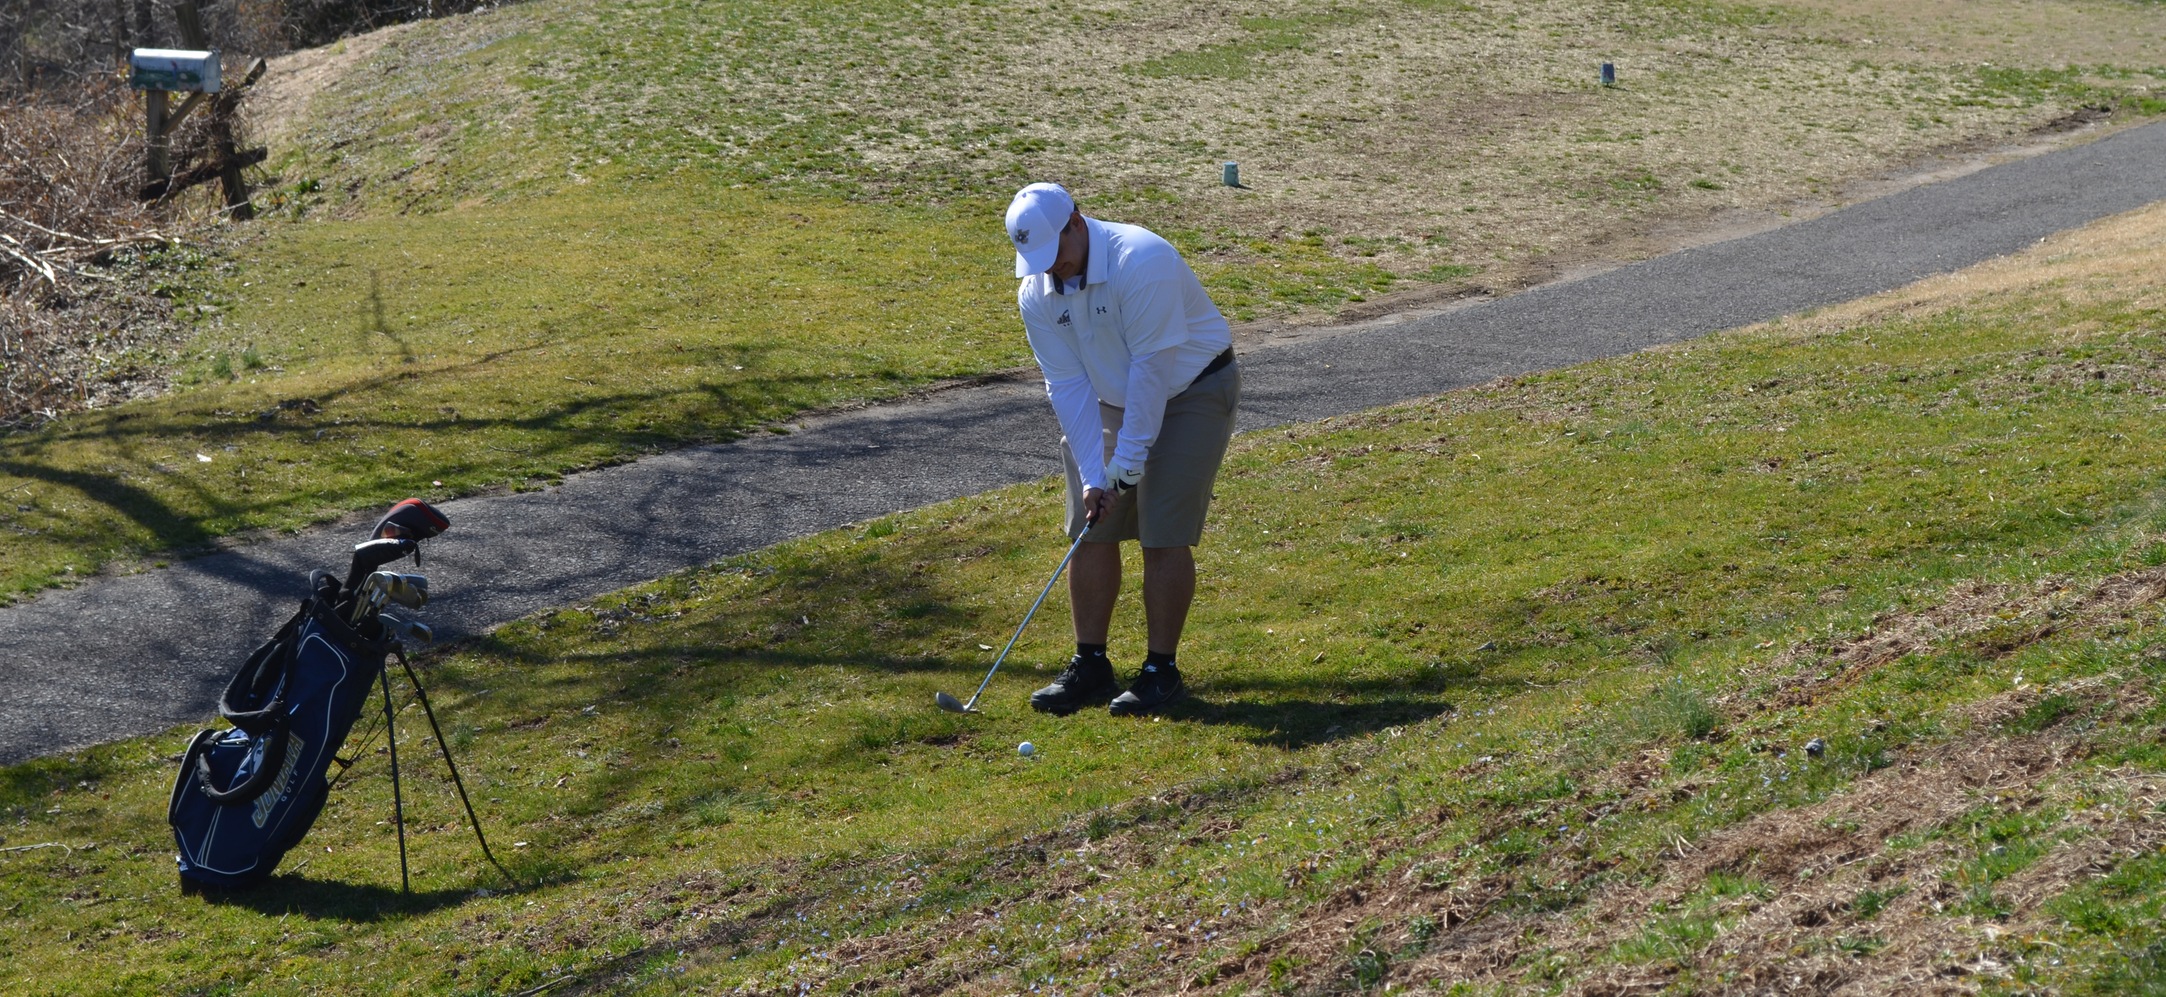 Men's Golf Wraps Up Play at the Landmark Championships